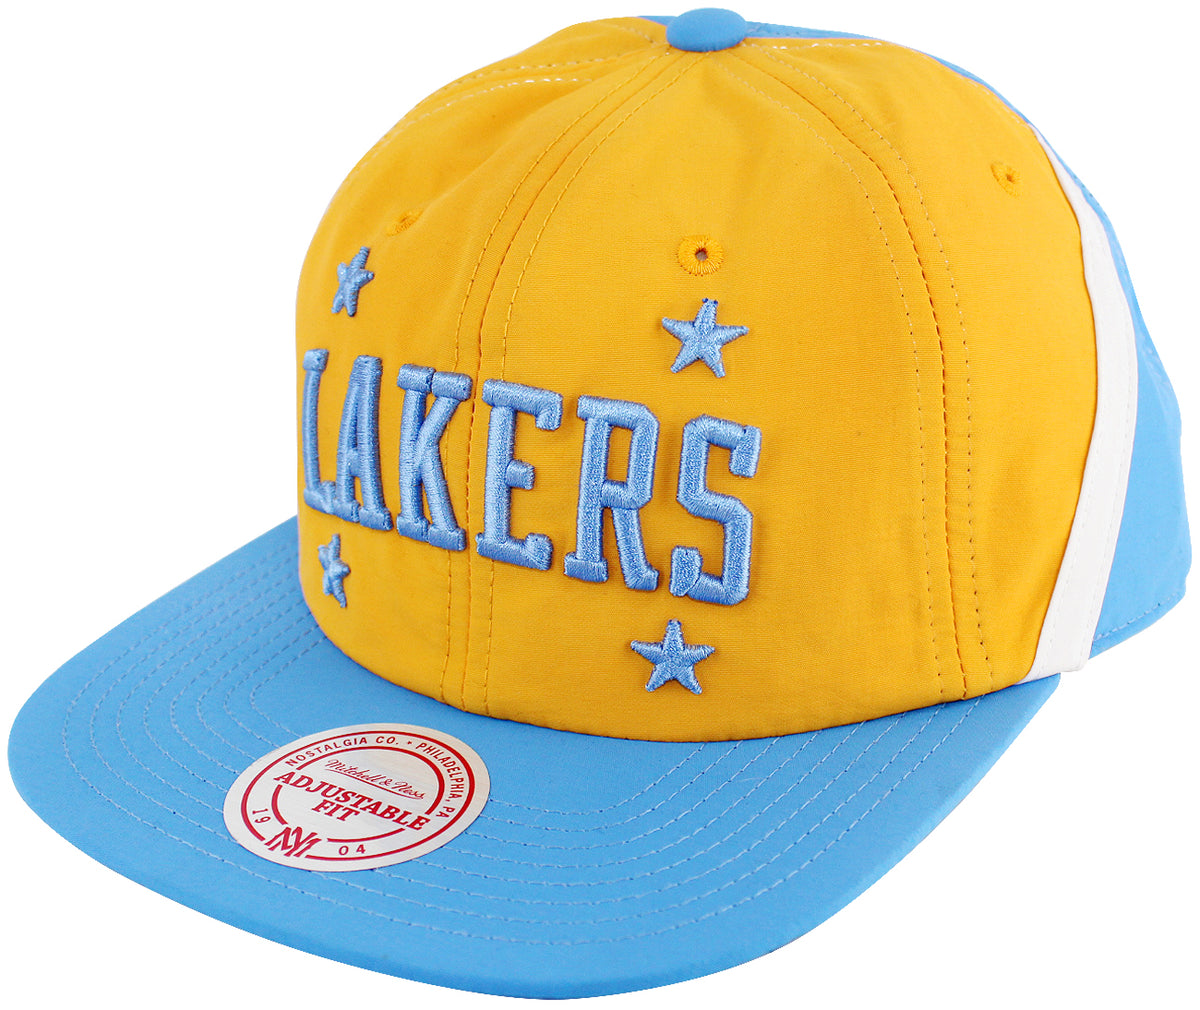 Mitchell & Ness Los Angeles Lakers Classic Edition Snapback Hat Yellow